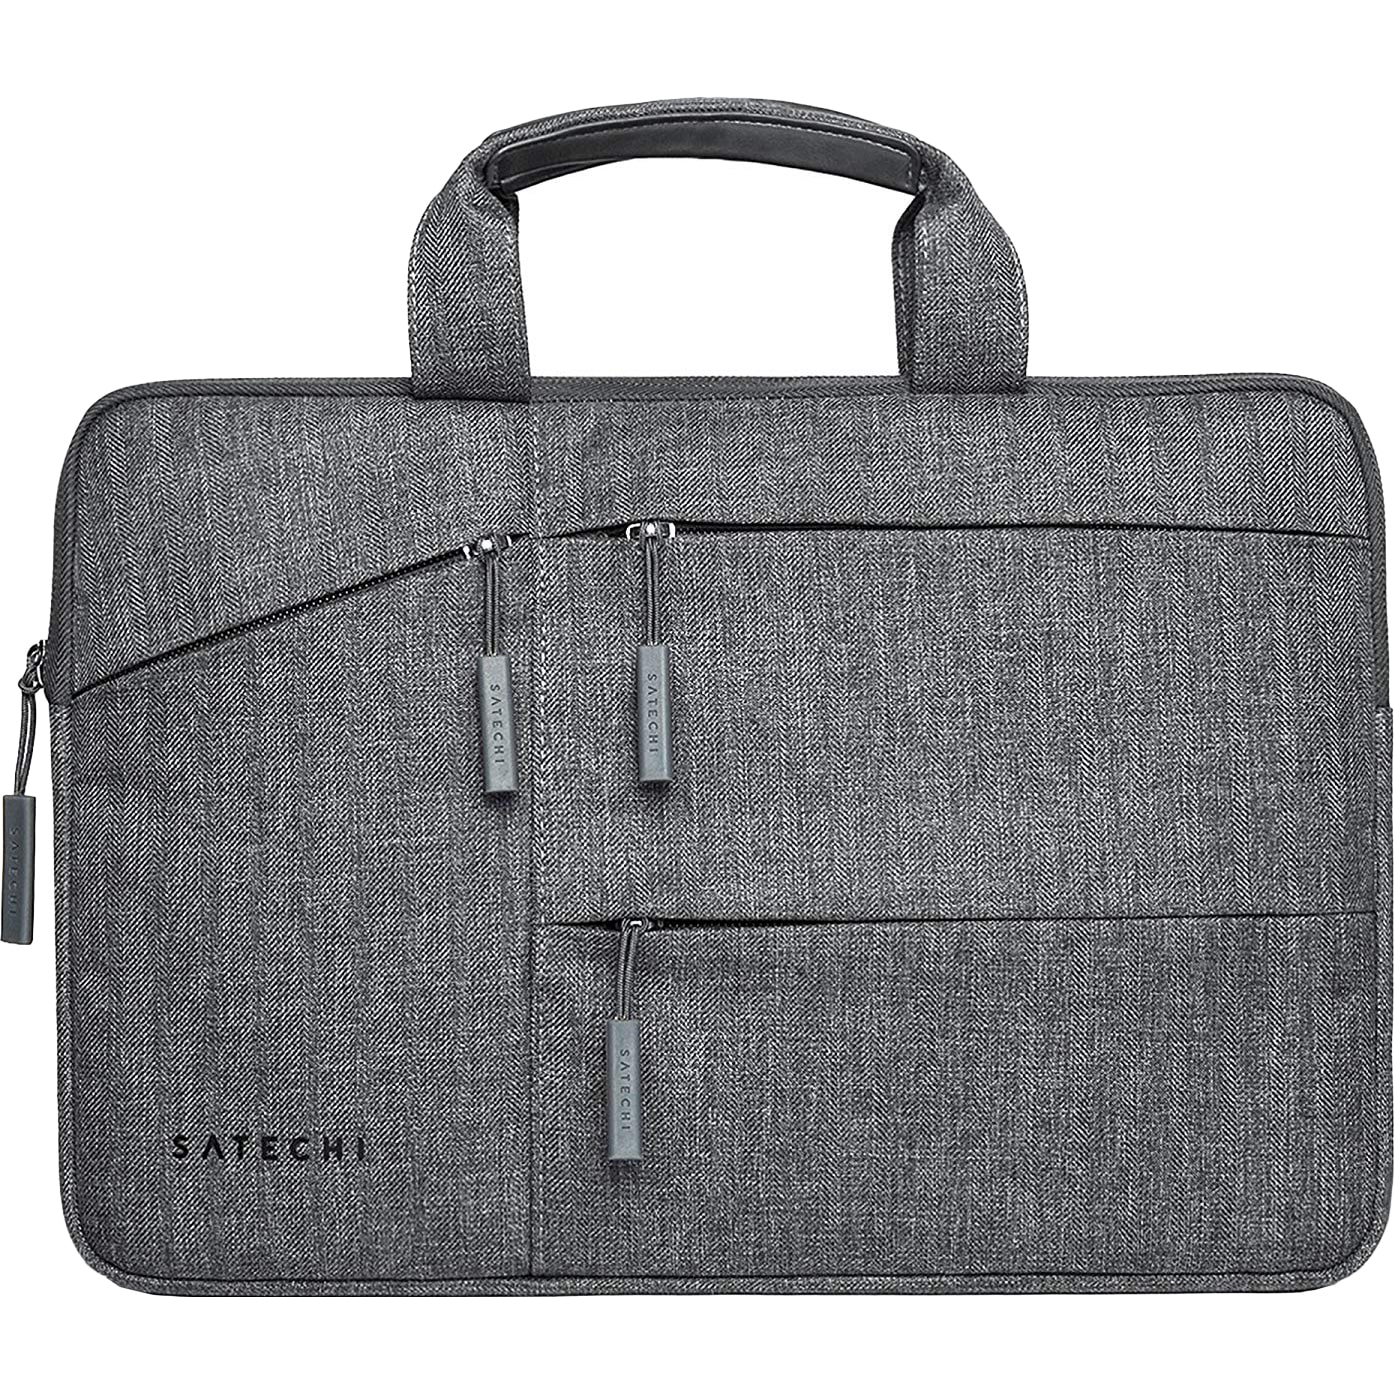 Сумка Satechi Water-Resistant Laptop Carrying Case ST-LTB15 цена и фото